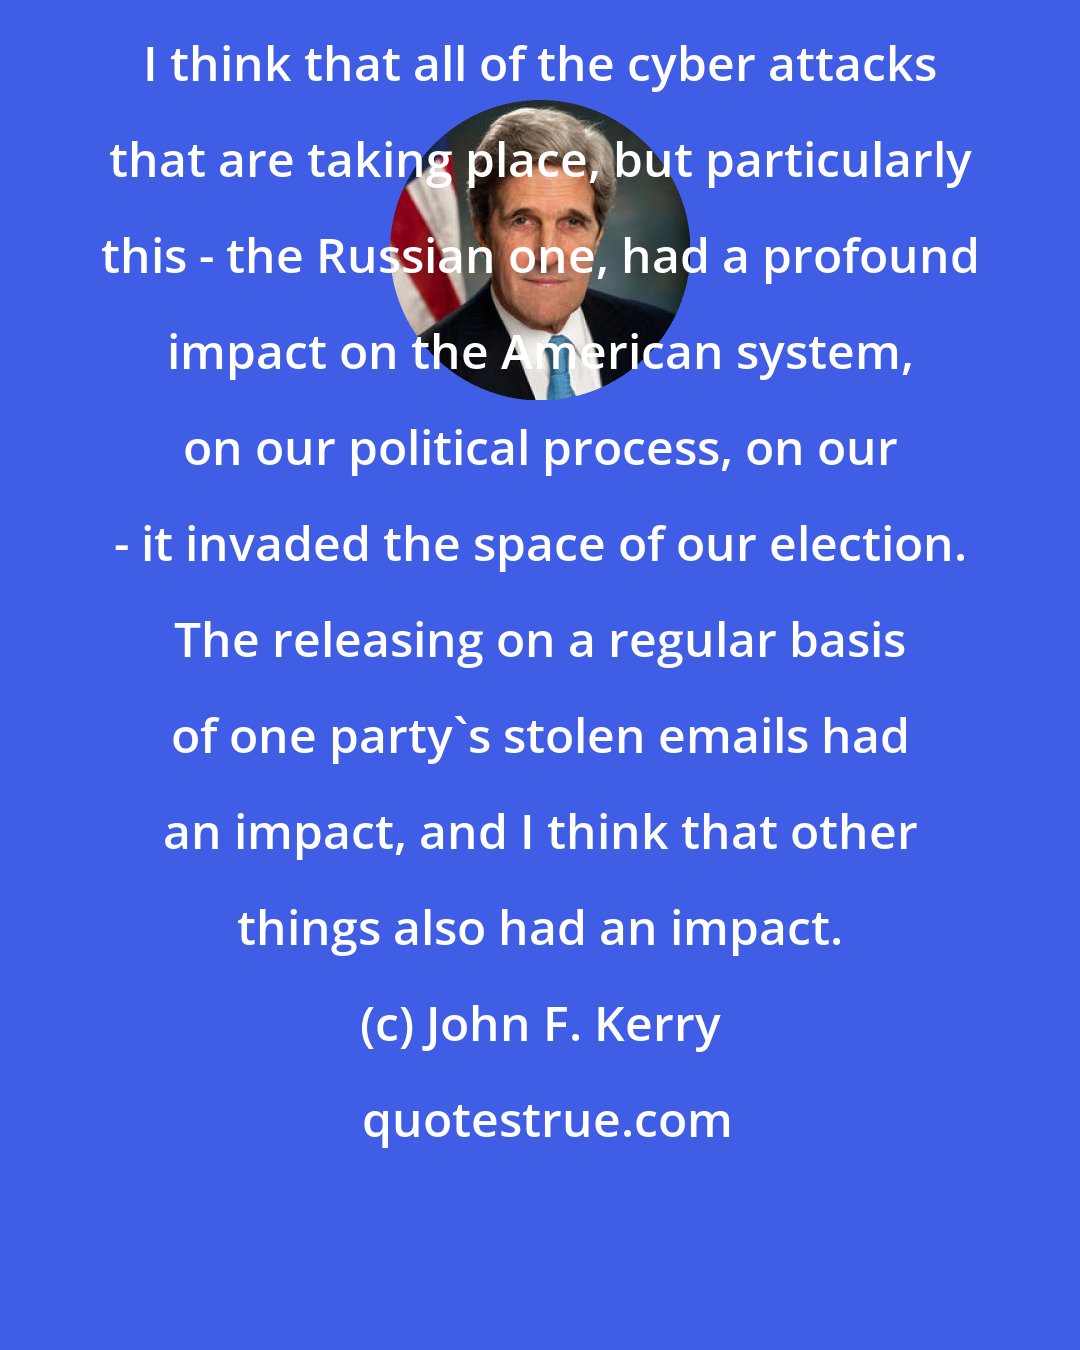 John F. Kerry: I think that all of the cyber attacks that are taking place, but particularly this - the Russian one, had a profound impact on the American system, on our political process, on our - it invaded the space of our election. The releasing on a regular basis of one party's stolen emails had an impact, and I think that other things also had an impact.